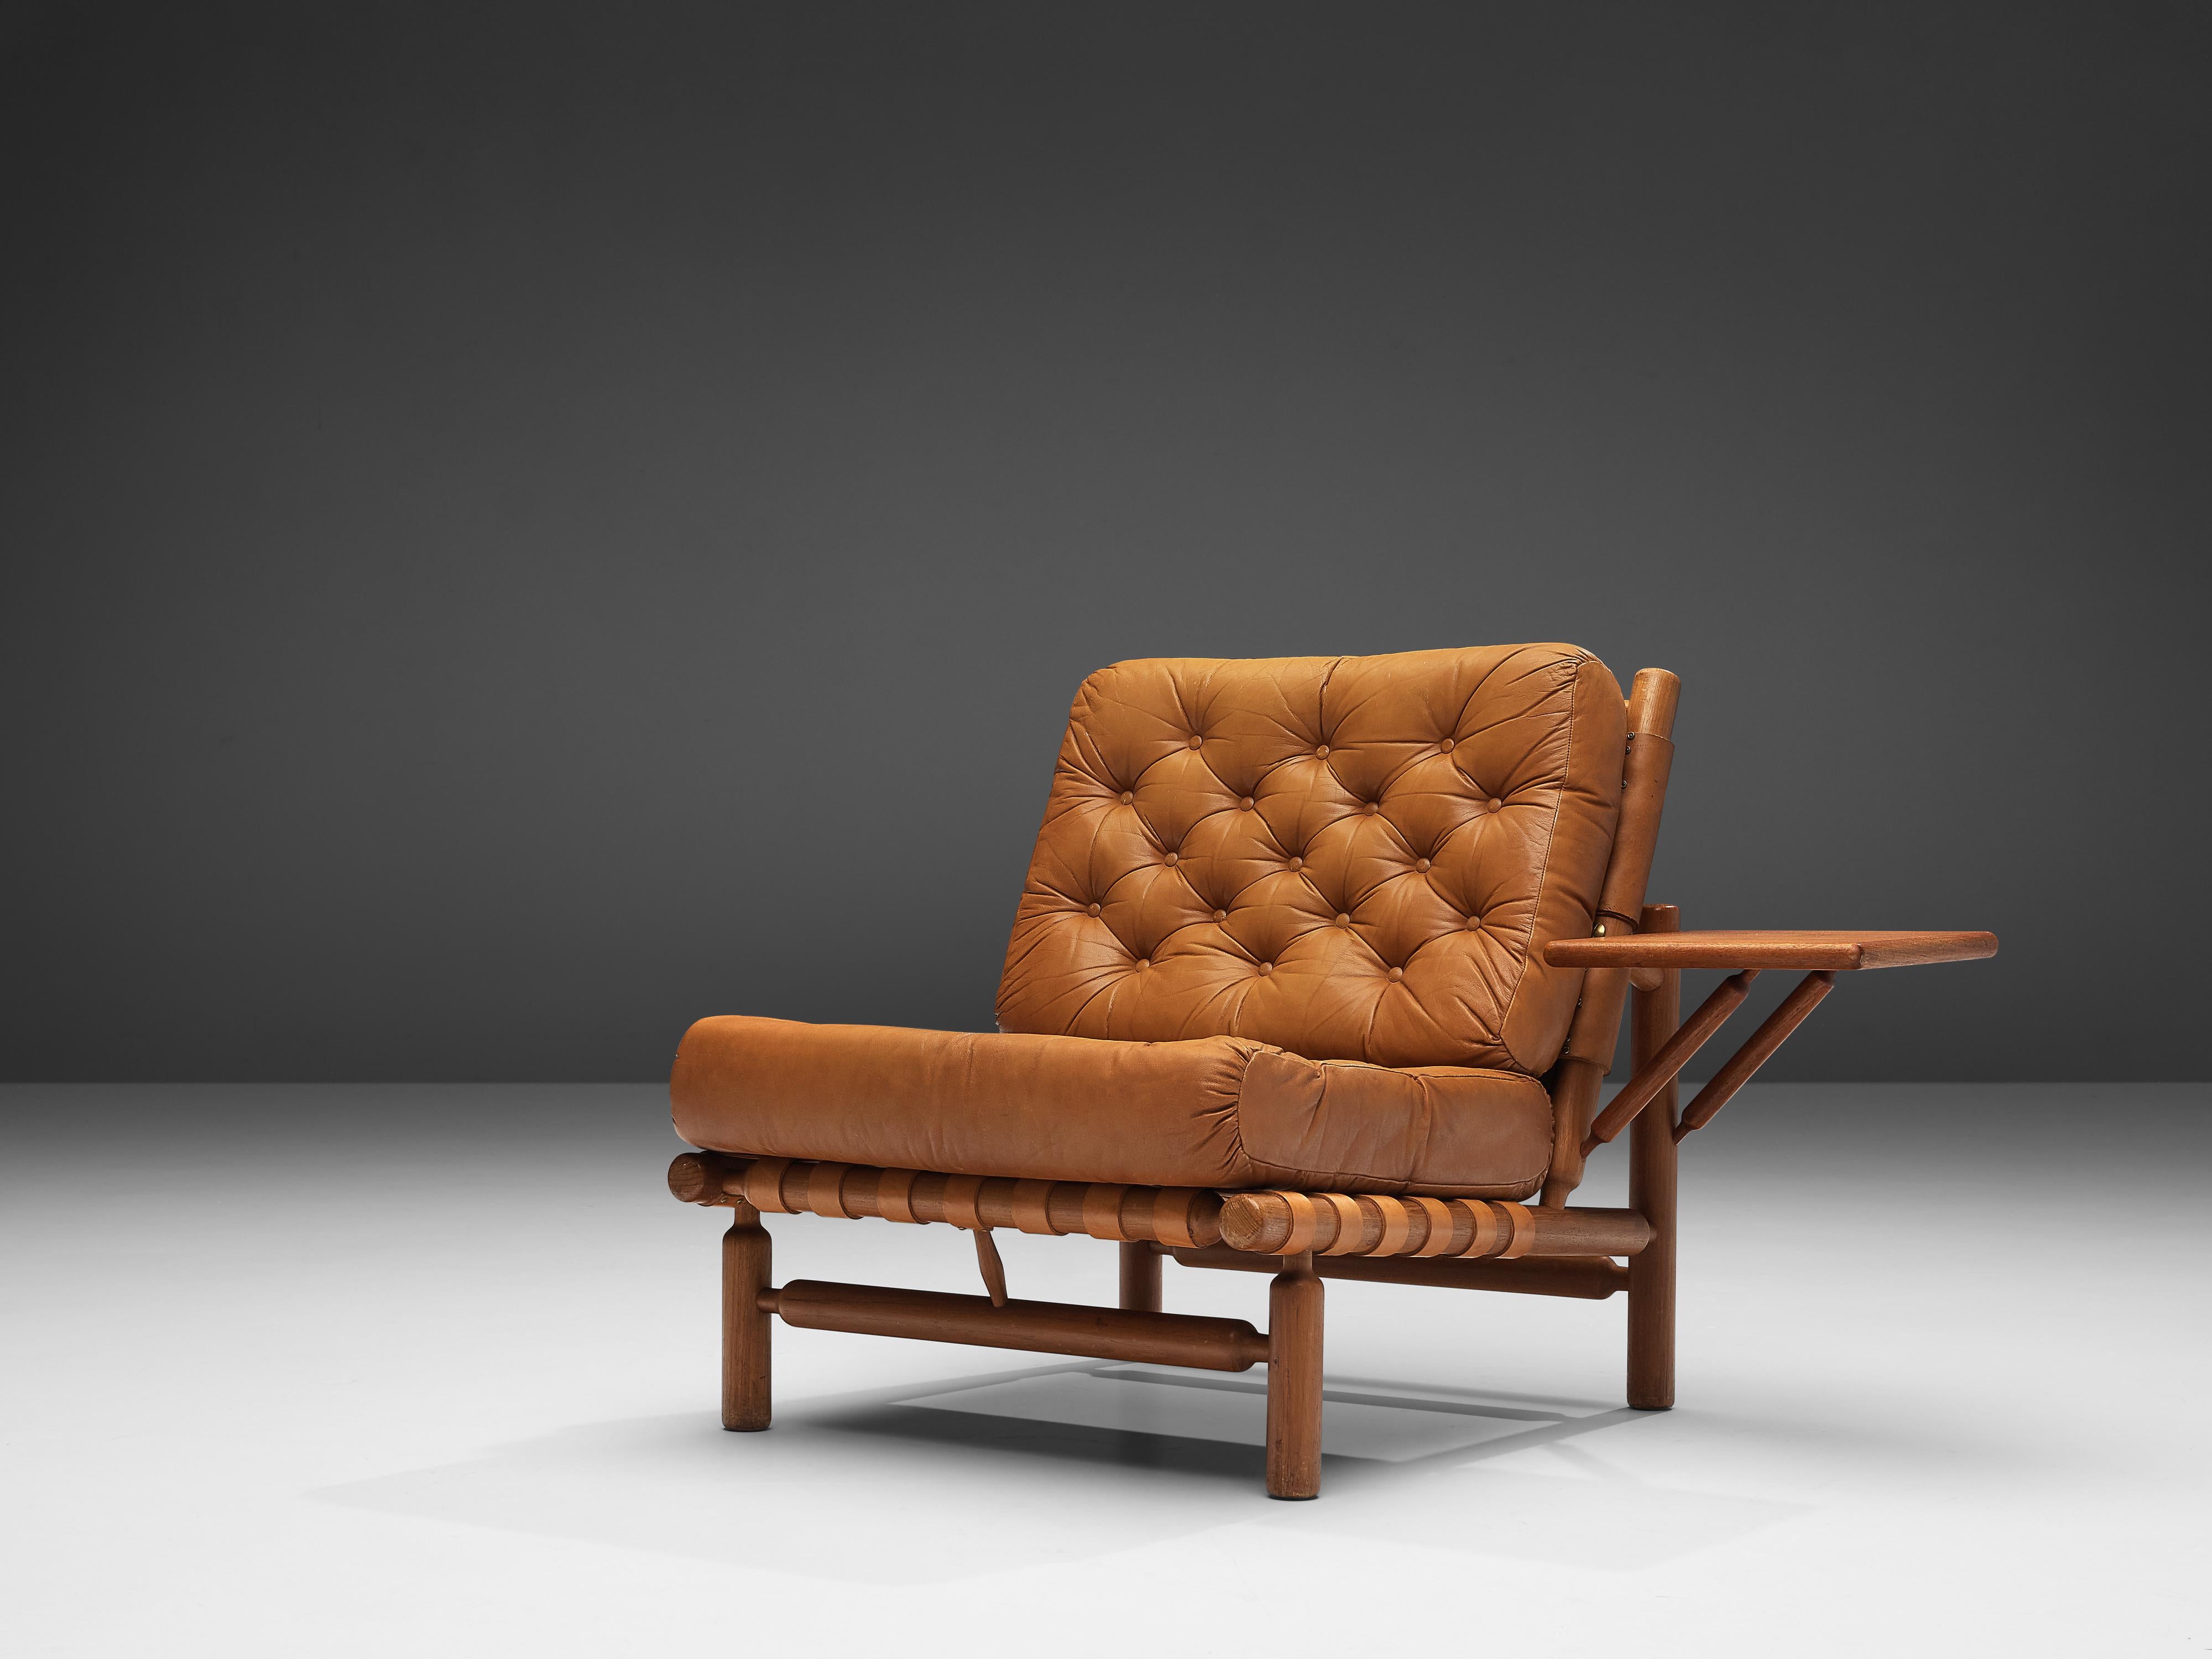 Ilmari Tapiovaara for Esposizione La Permanente Mobili, lounge chair with ottoman, teak and leather, Finland, 1957. 

Lounge chair with ottoman by Finnish designer Ilmari Tapiovaara. This organic design features beautiful patinated leather support